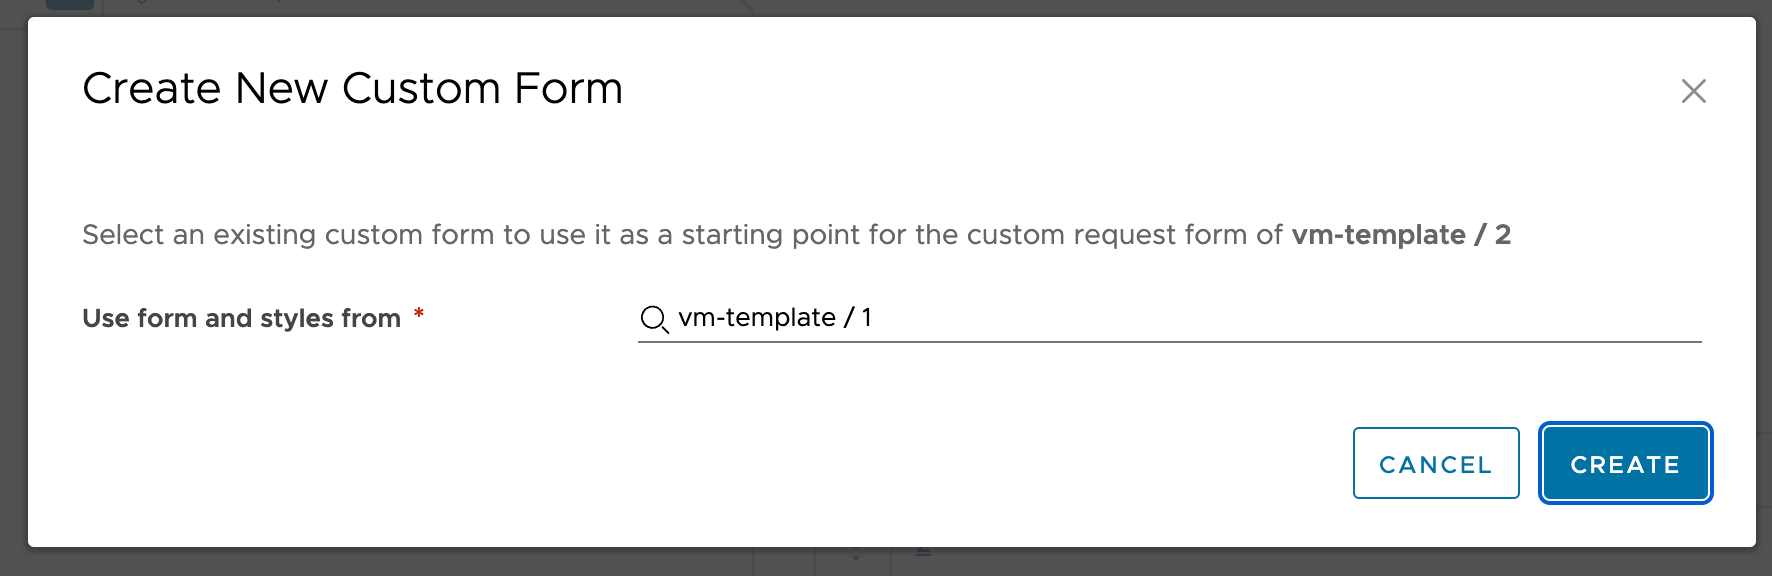 Create form from version 1